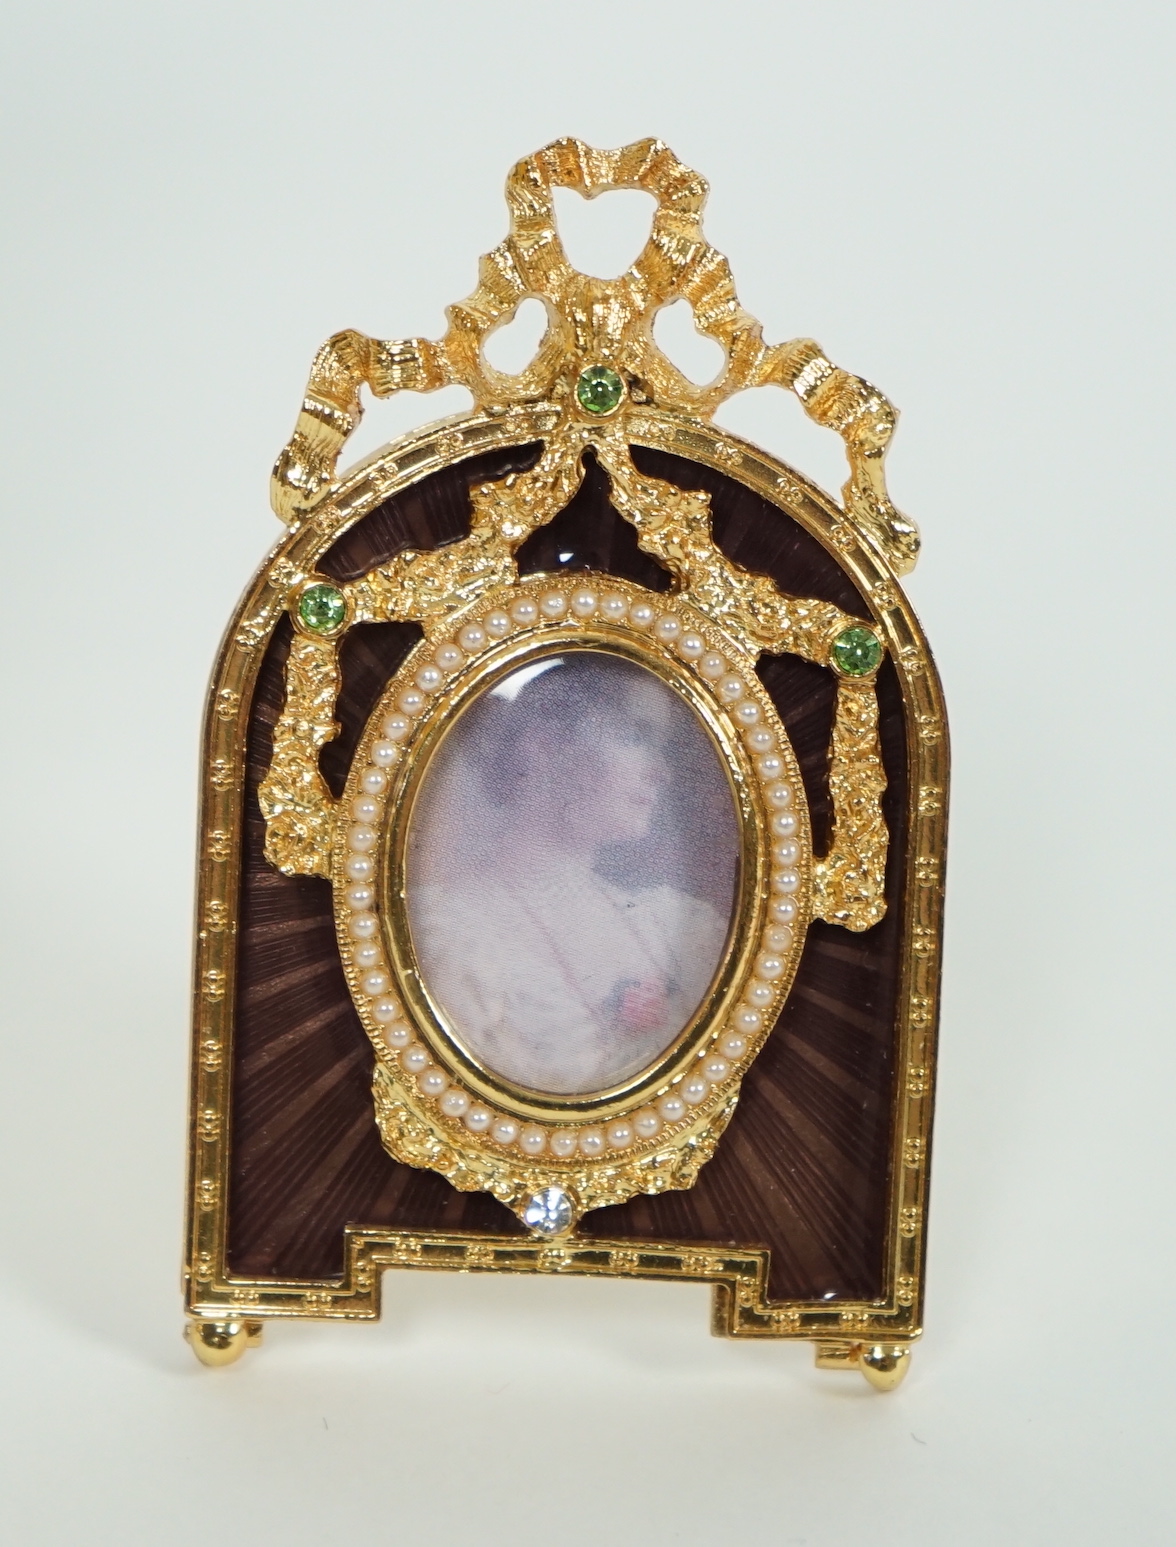 A Fabergé Imperial Collection Menagerie Rabbit Surprise Egg on stand together with a Fabergé gilt and enamel photograph frame